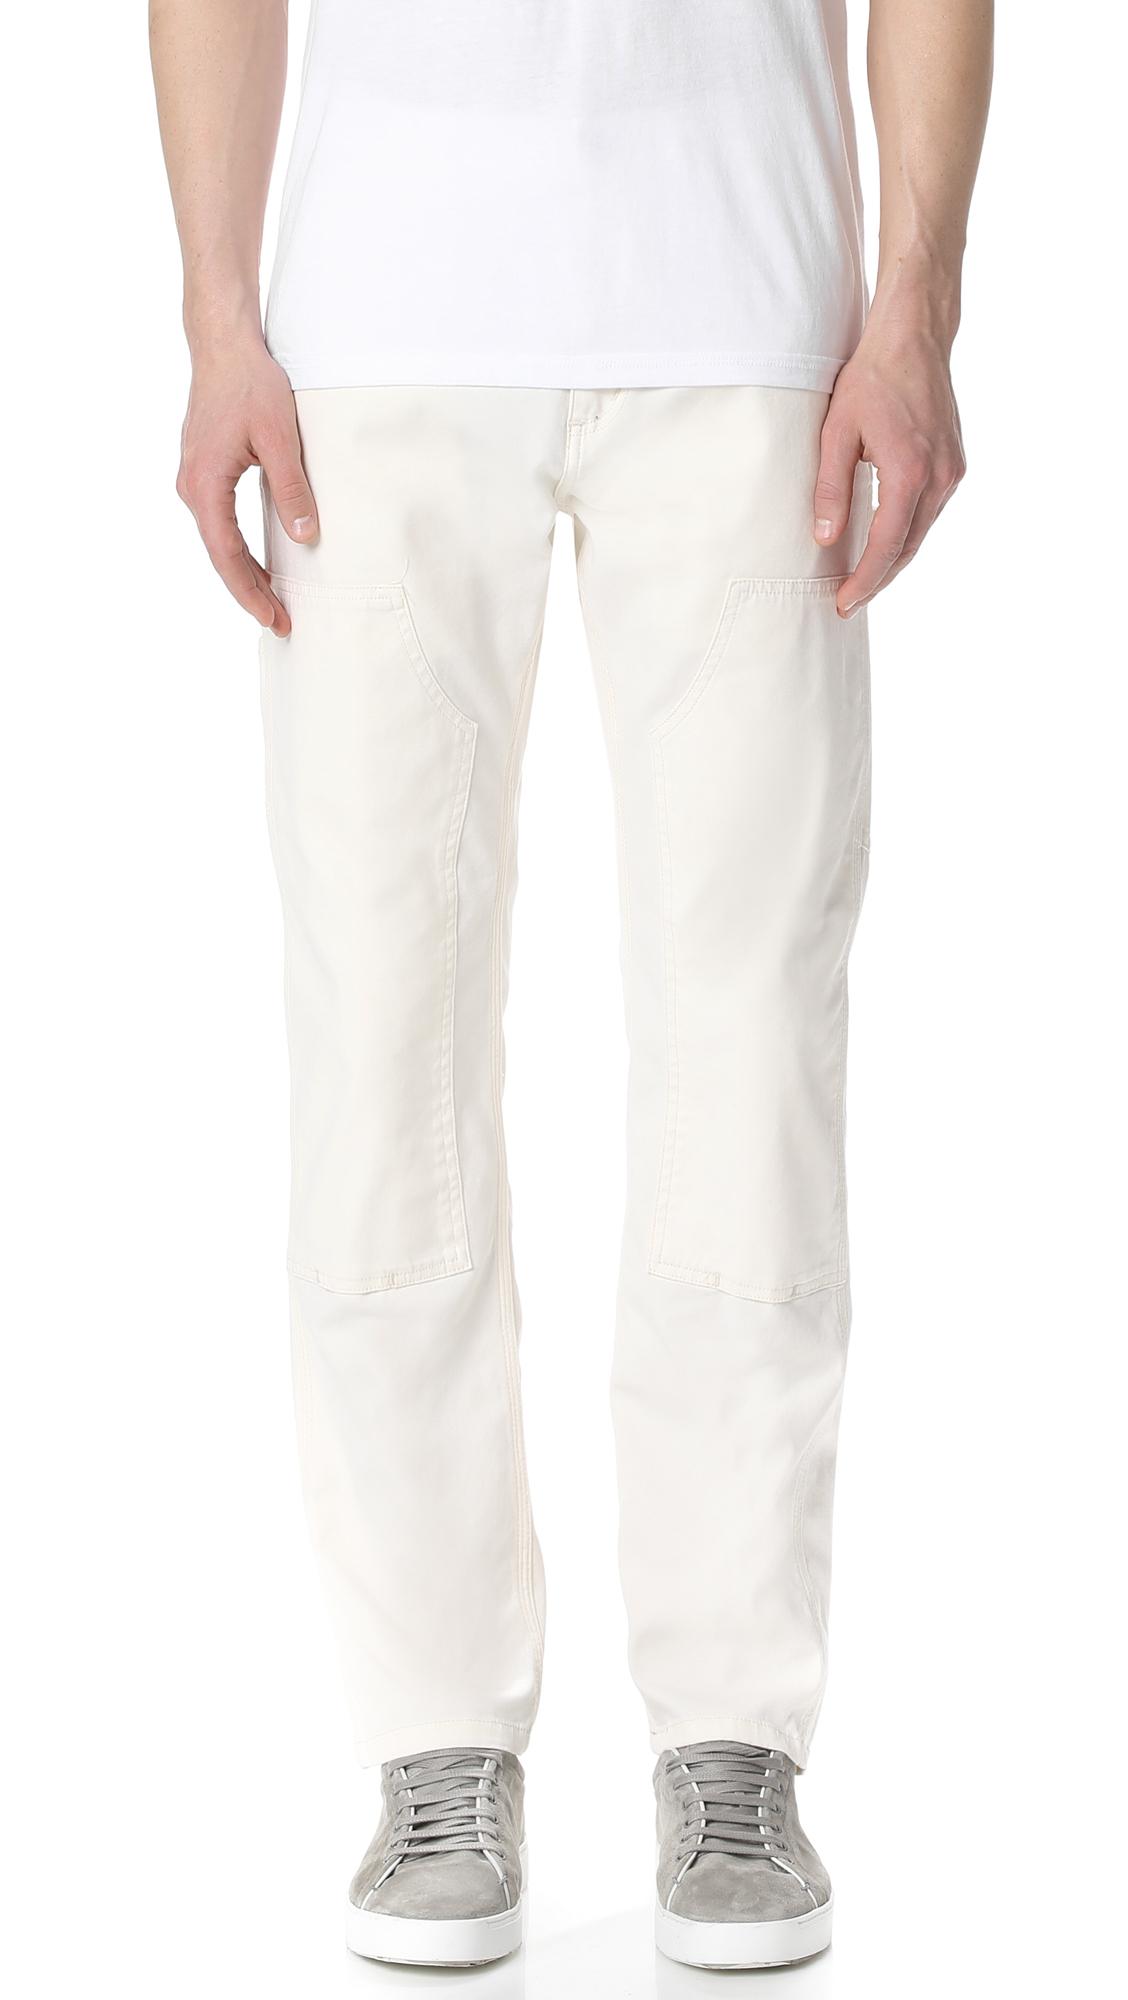 Carhartt WIP Canvas Ruck Double Knee Pants in White for Men - Lyst